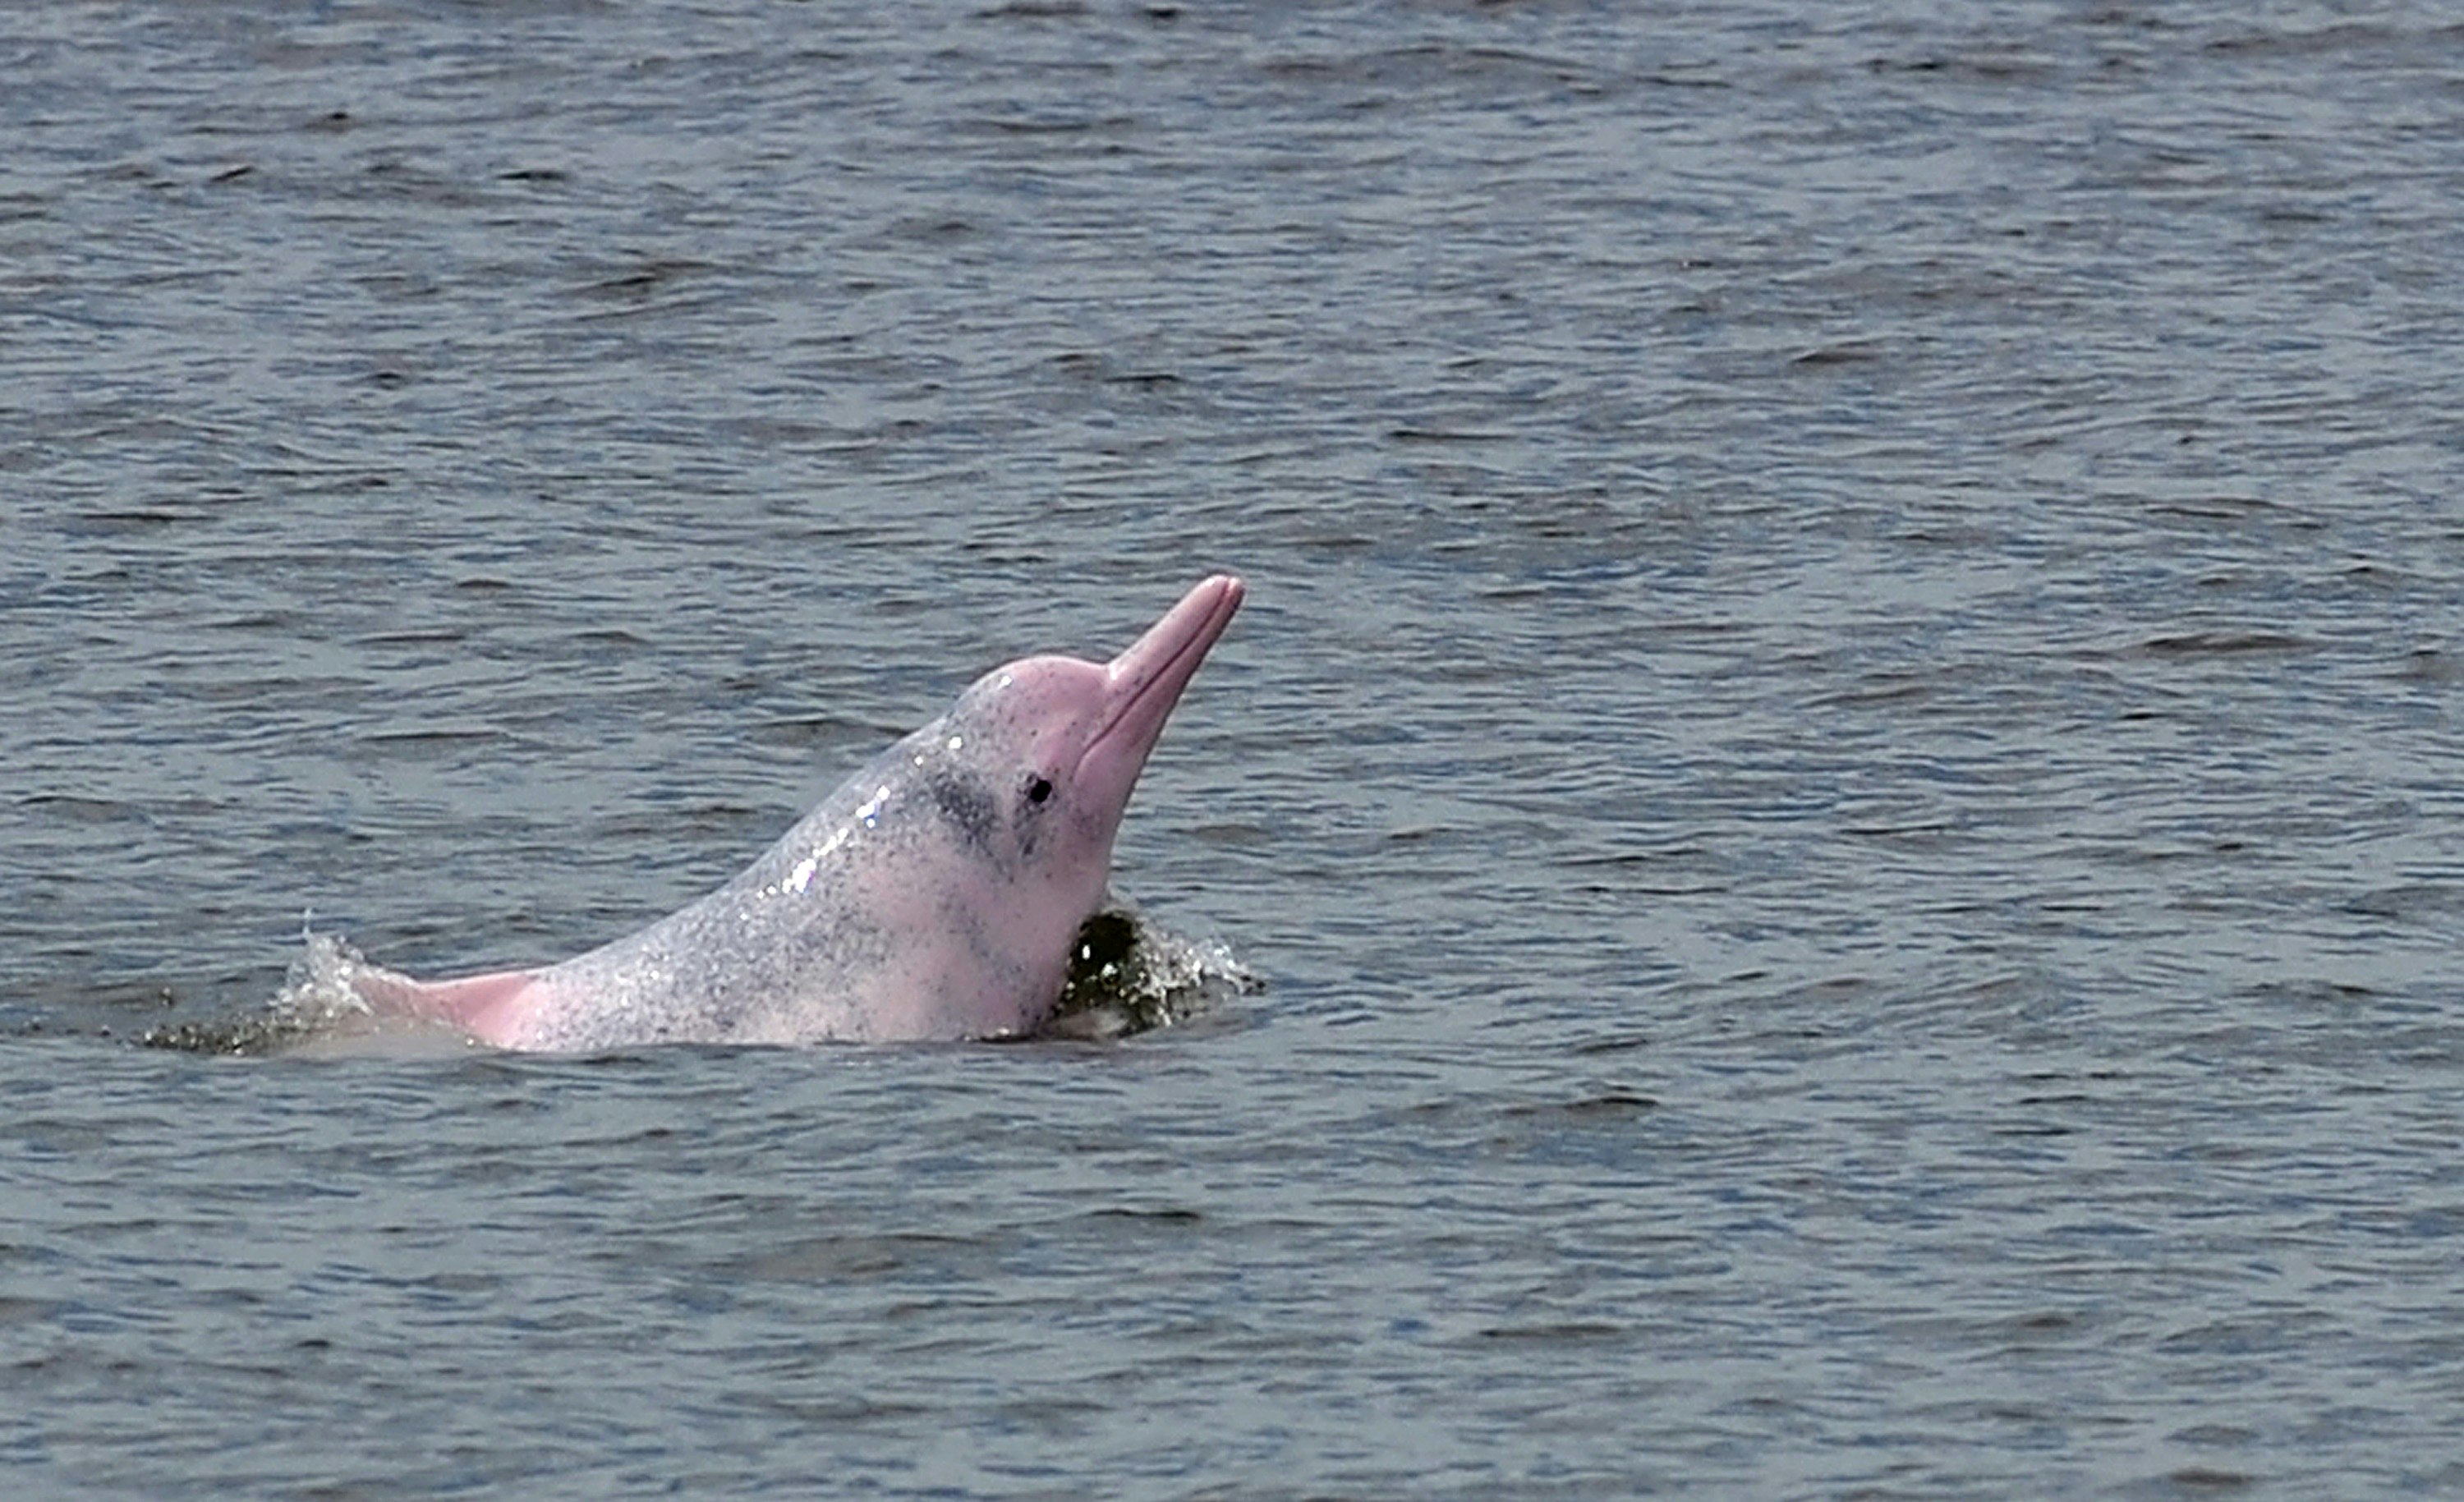 Chinese white dolphin or Indo-Pacific humpback dolphin, nicknamed the pink dolphin, swims in waters off the coast of Hong Kong